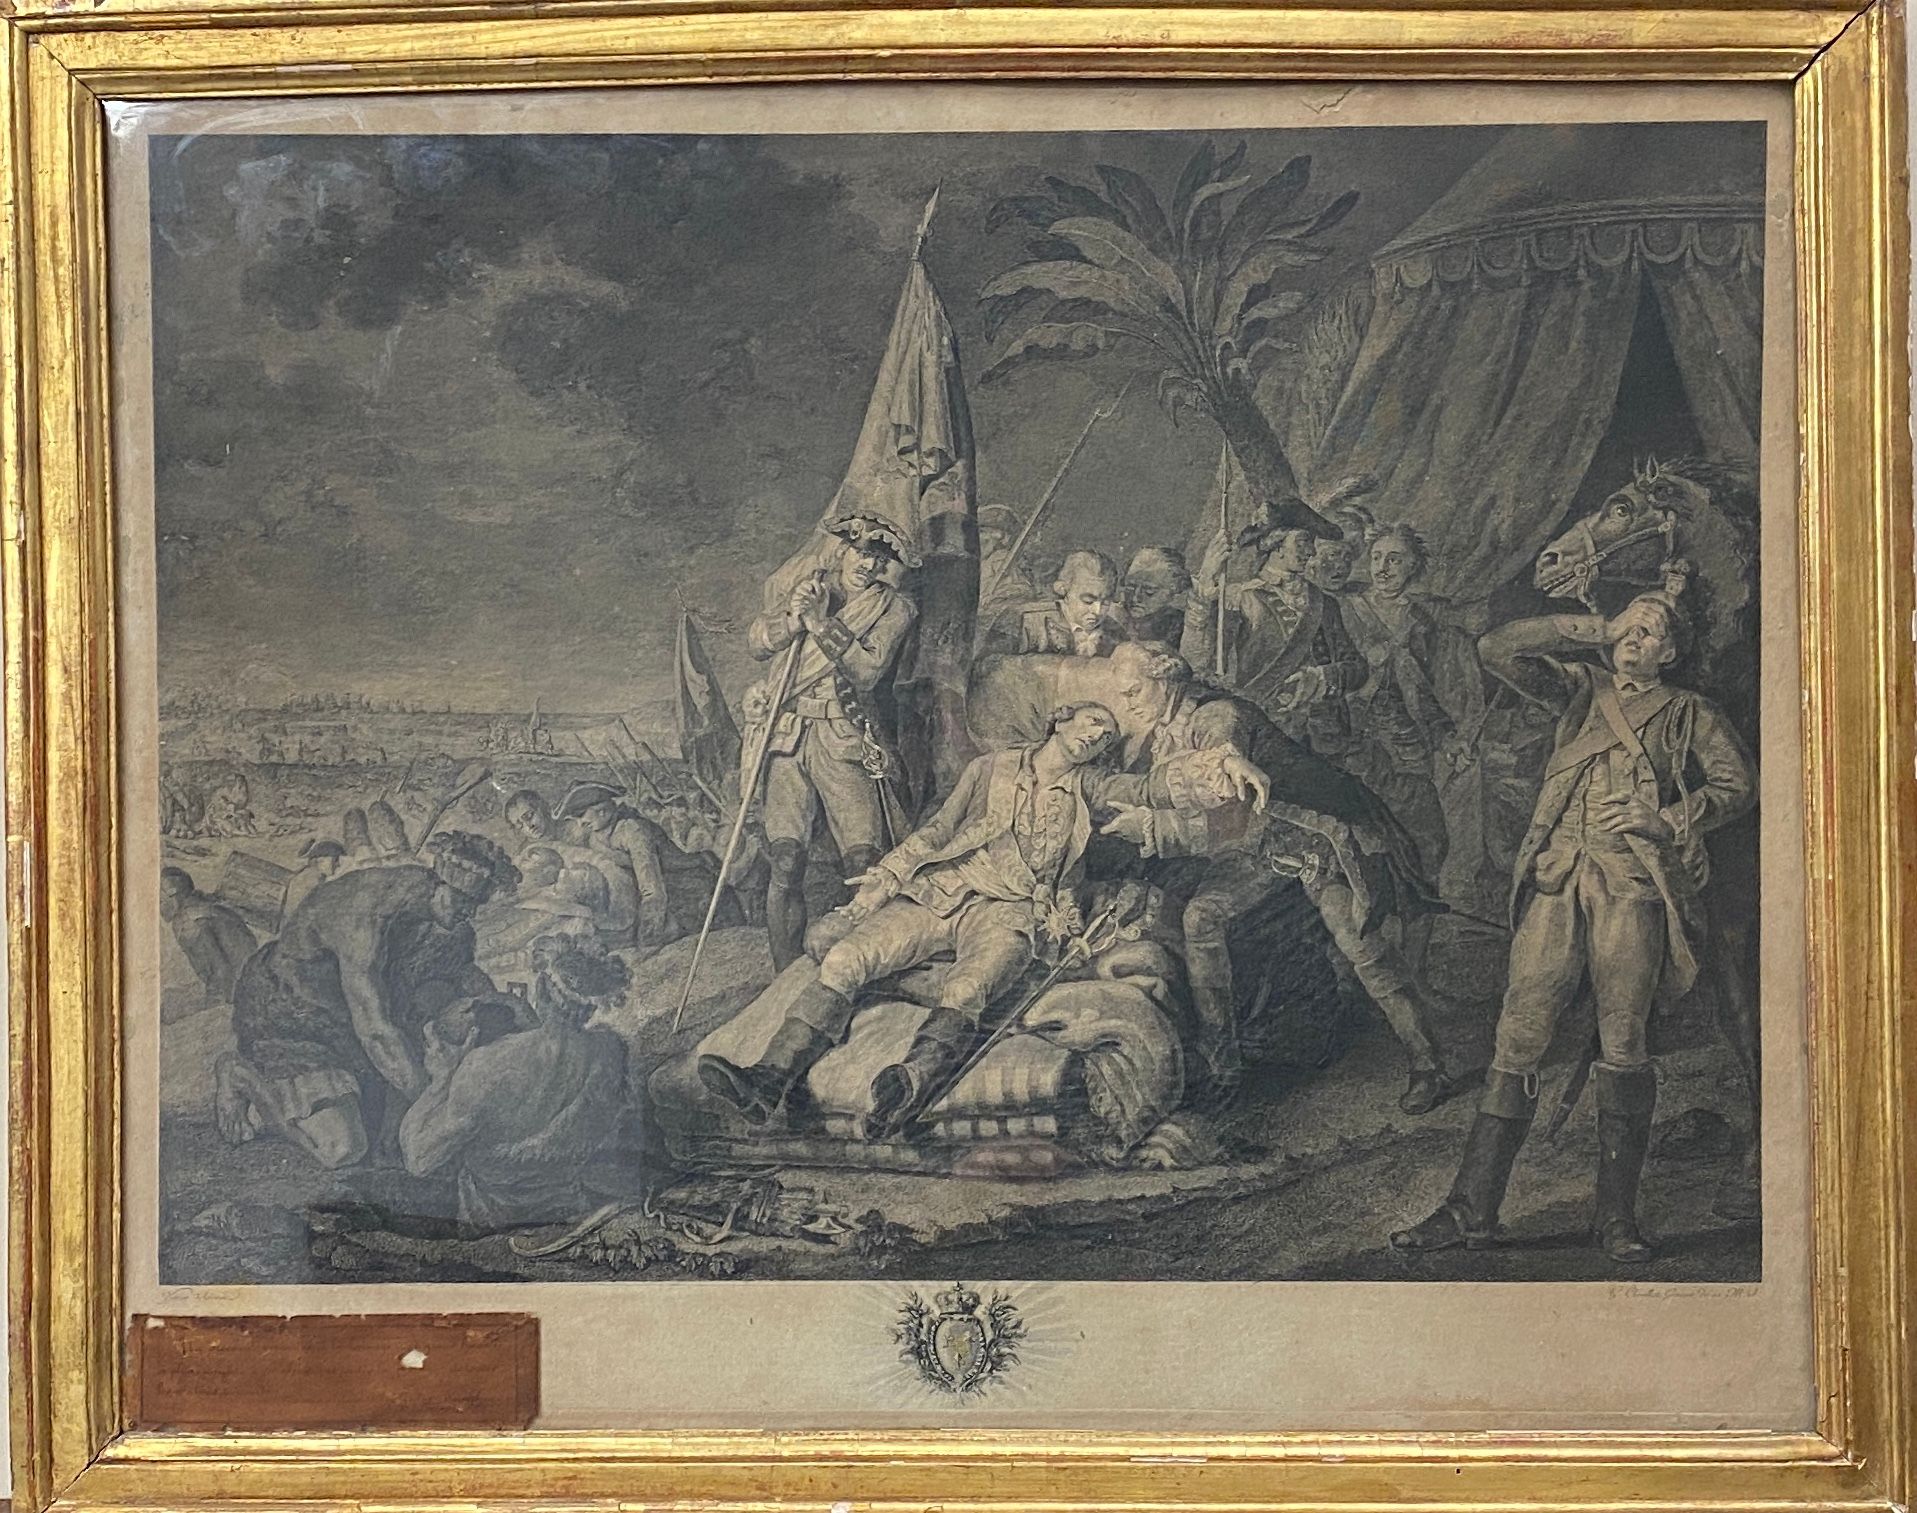 Null After Juste CHEVILLET (1729-1802)

The death of the Marquis de Montcalm at &hellip;